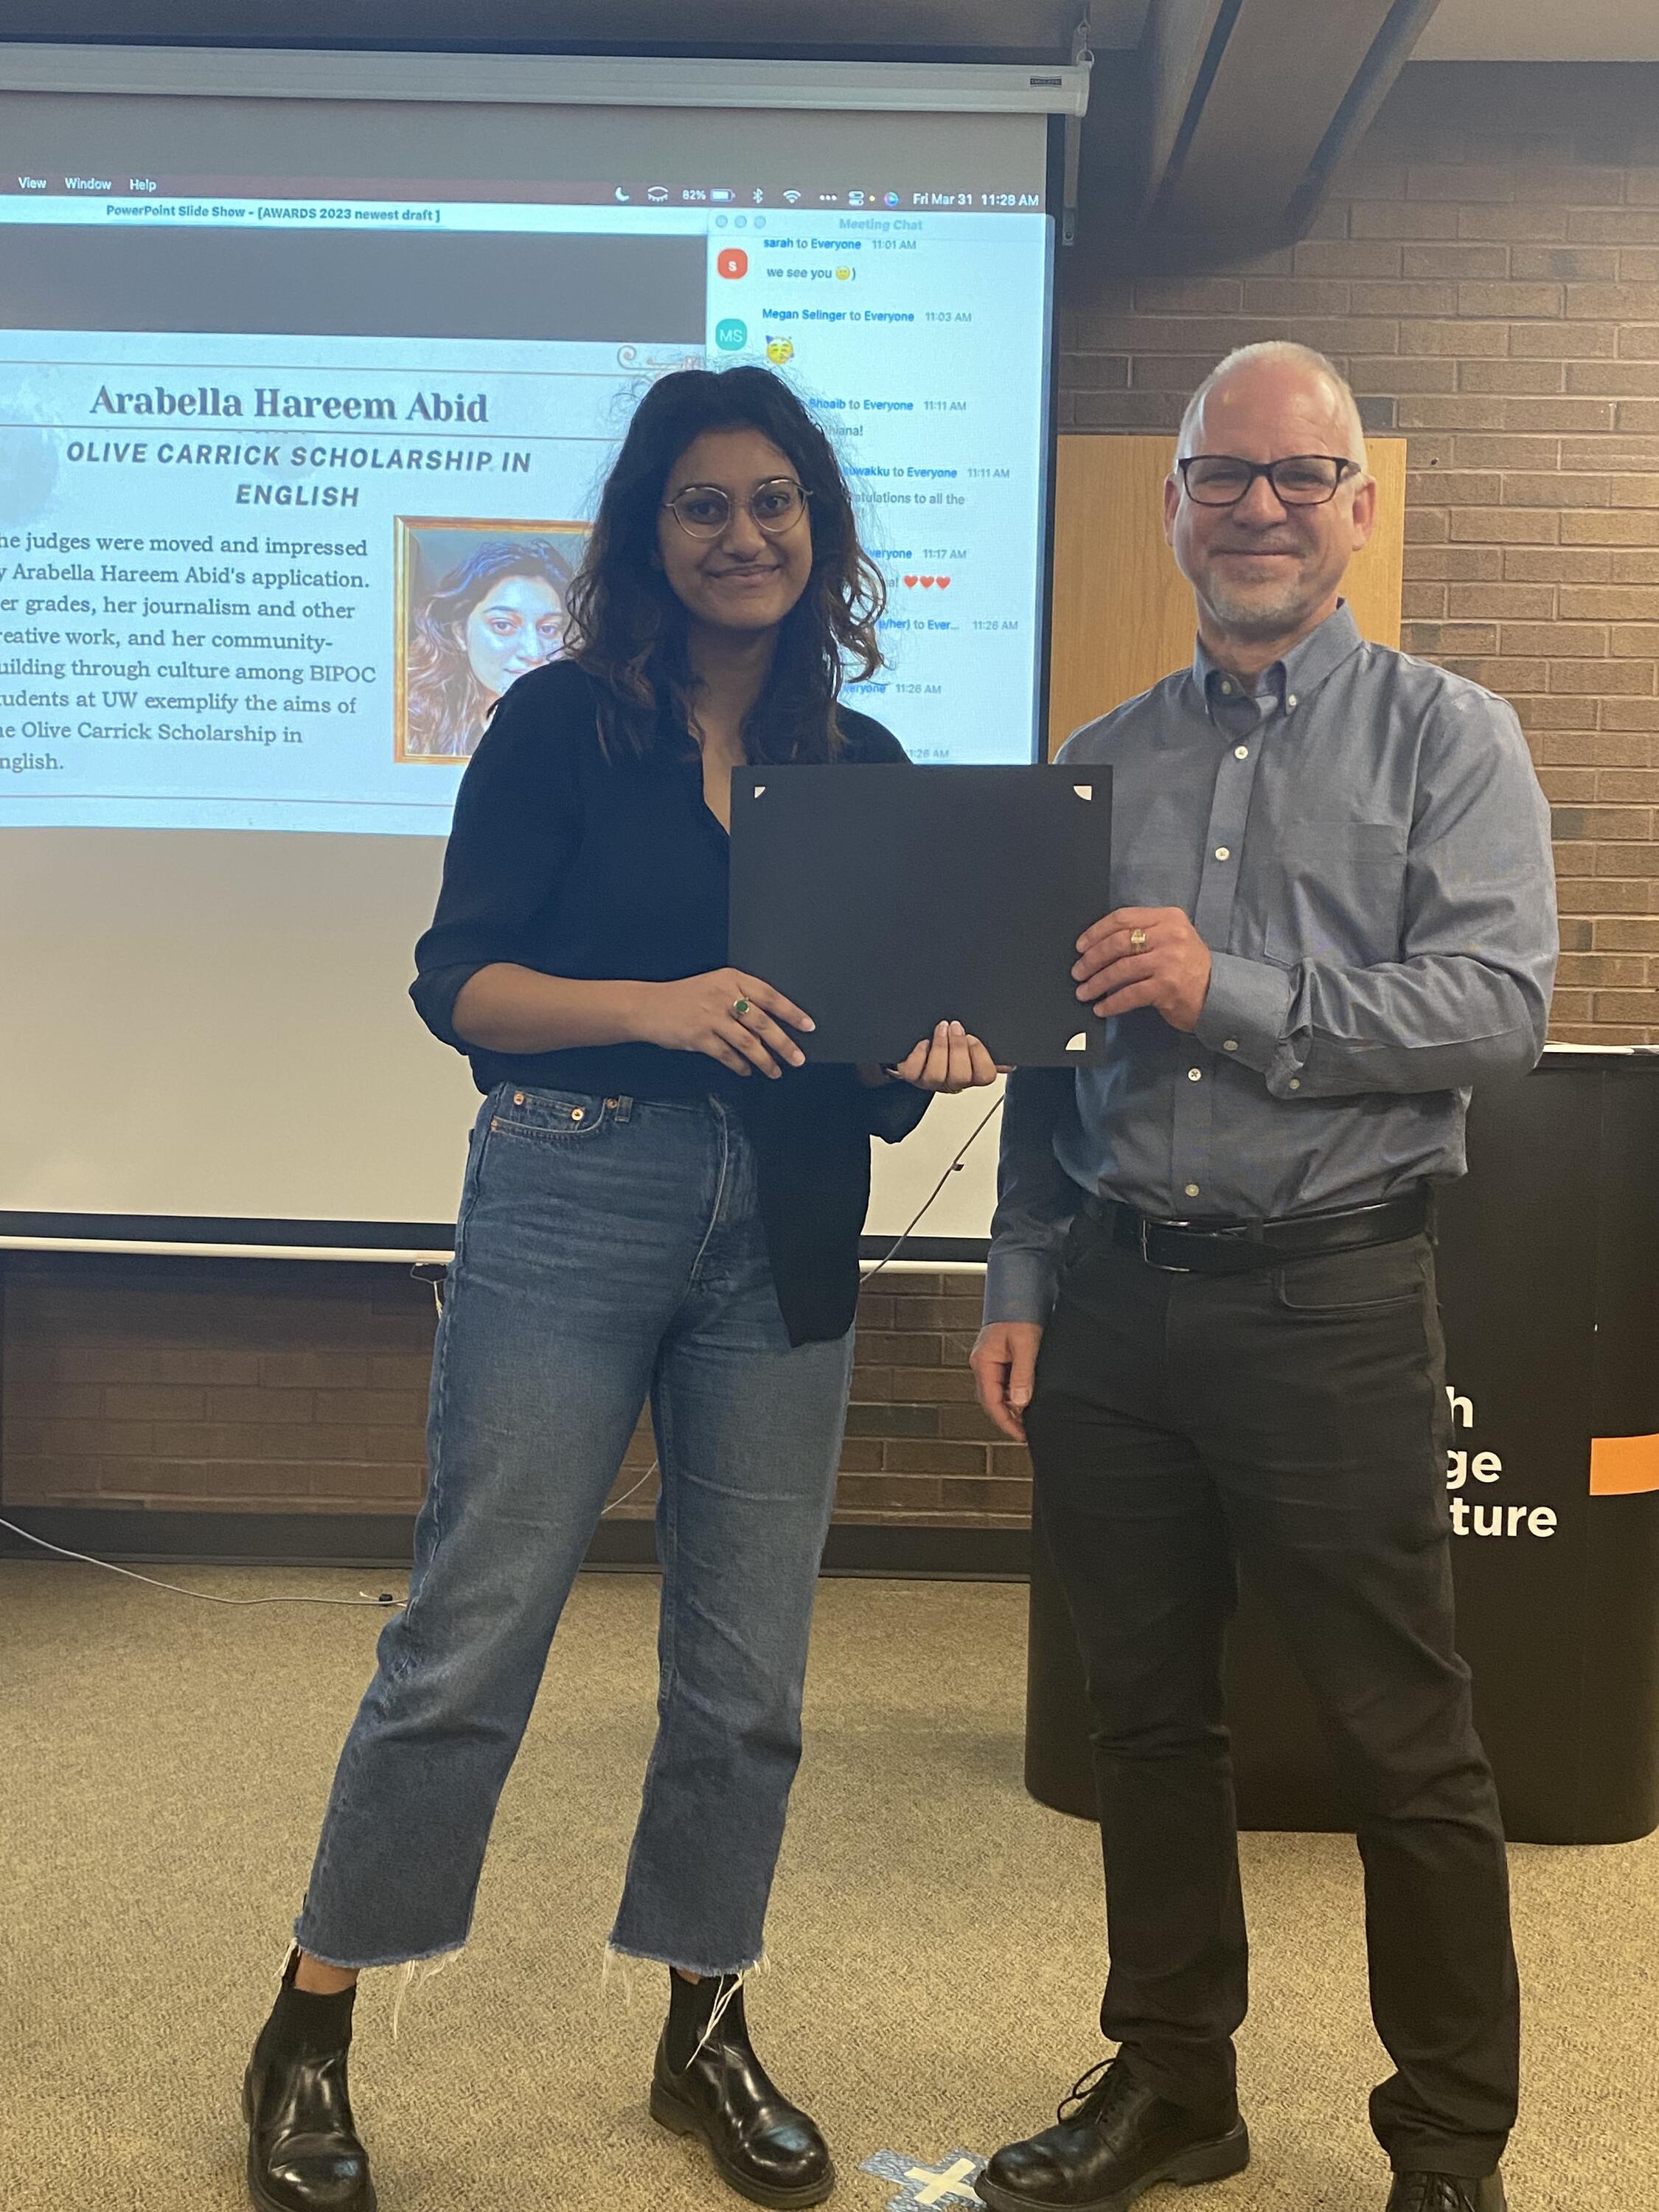 Arabella Hareem Abid receives the Olive Carrick Scholarship in English from Dr. Bruce Dadey.